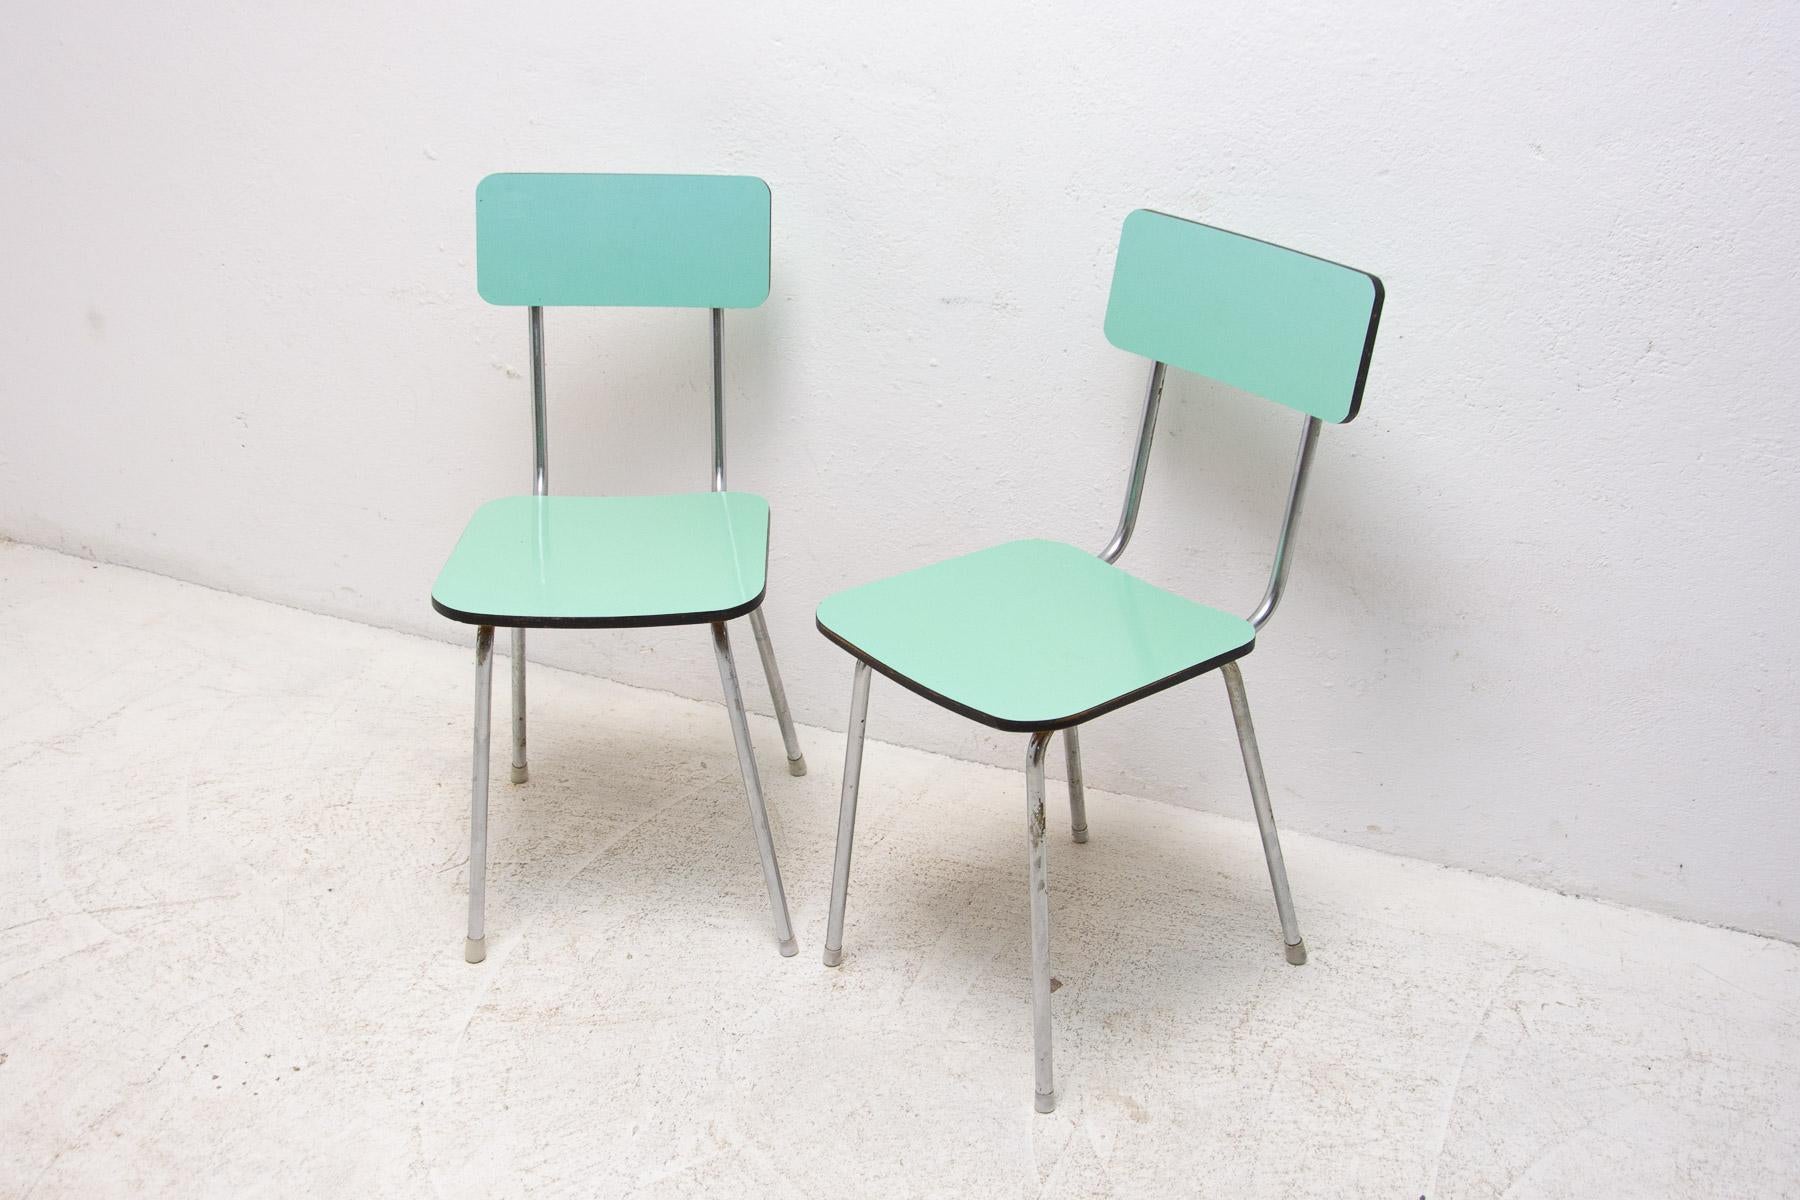  Pair of Czechoslovak Colored Formica Cafe Chairs, 1960´s In Good Condition For Sale In Prague 8, CZ